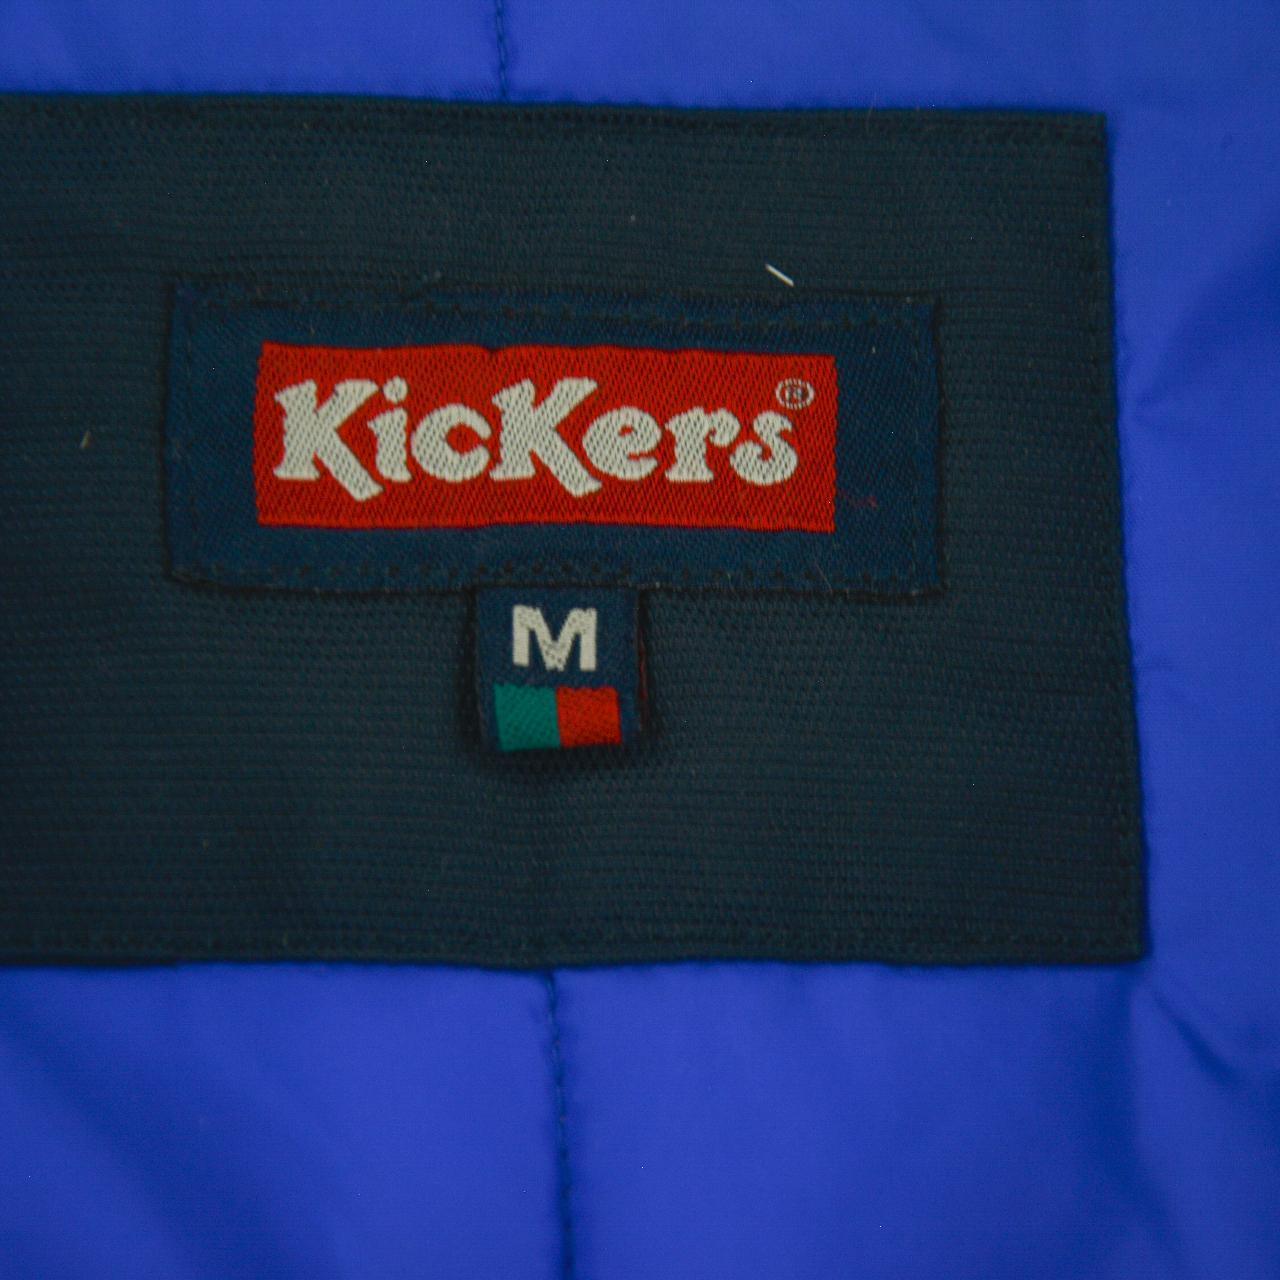 Vintage Kickers Padded Jacket Size M - Known Source